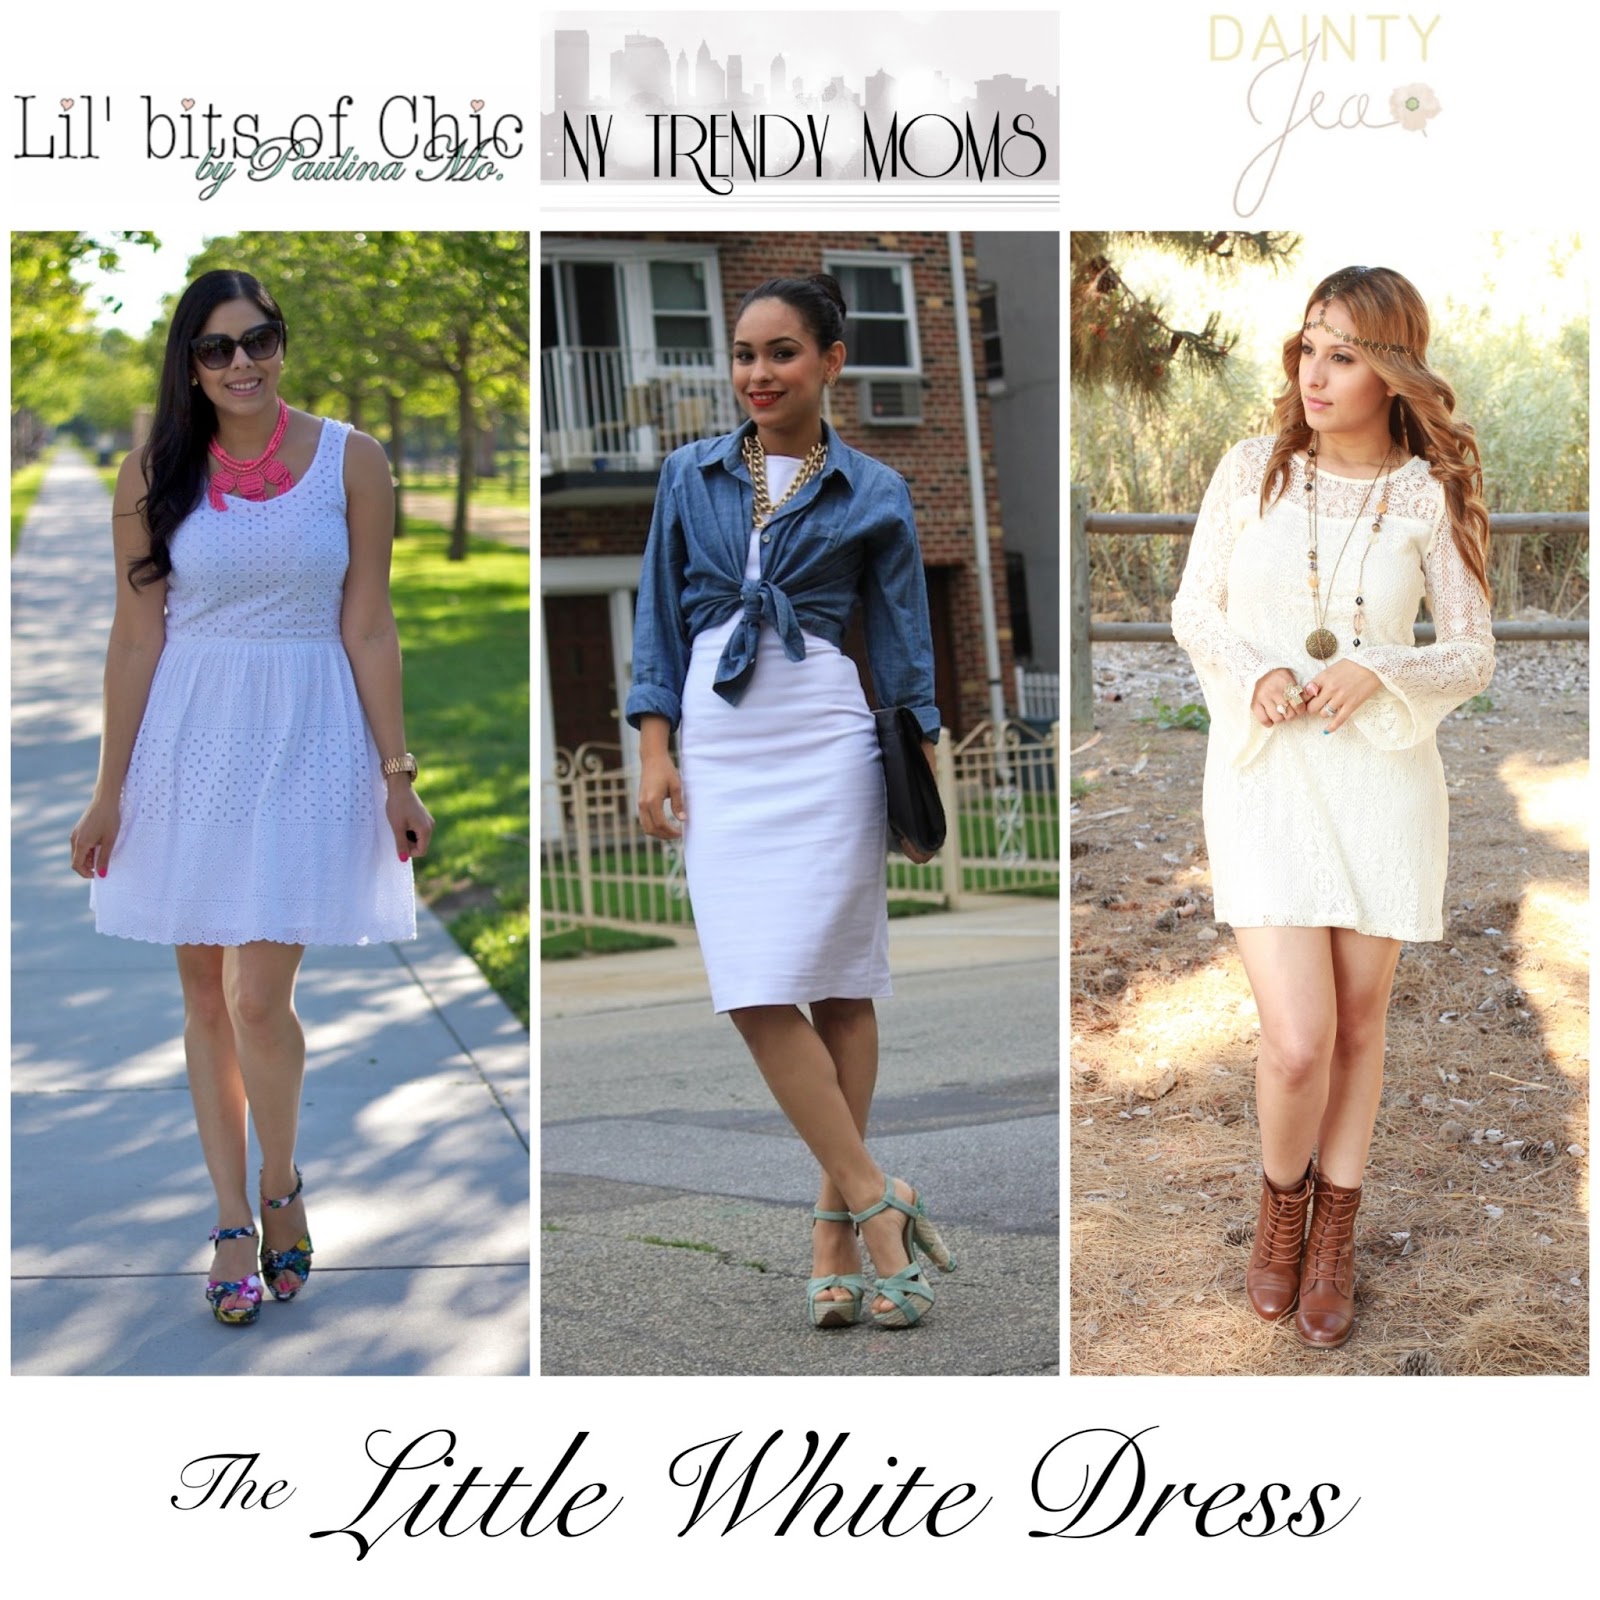 The Little White Dress *Collab with NYTrendyMoms and DaintyJea*